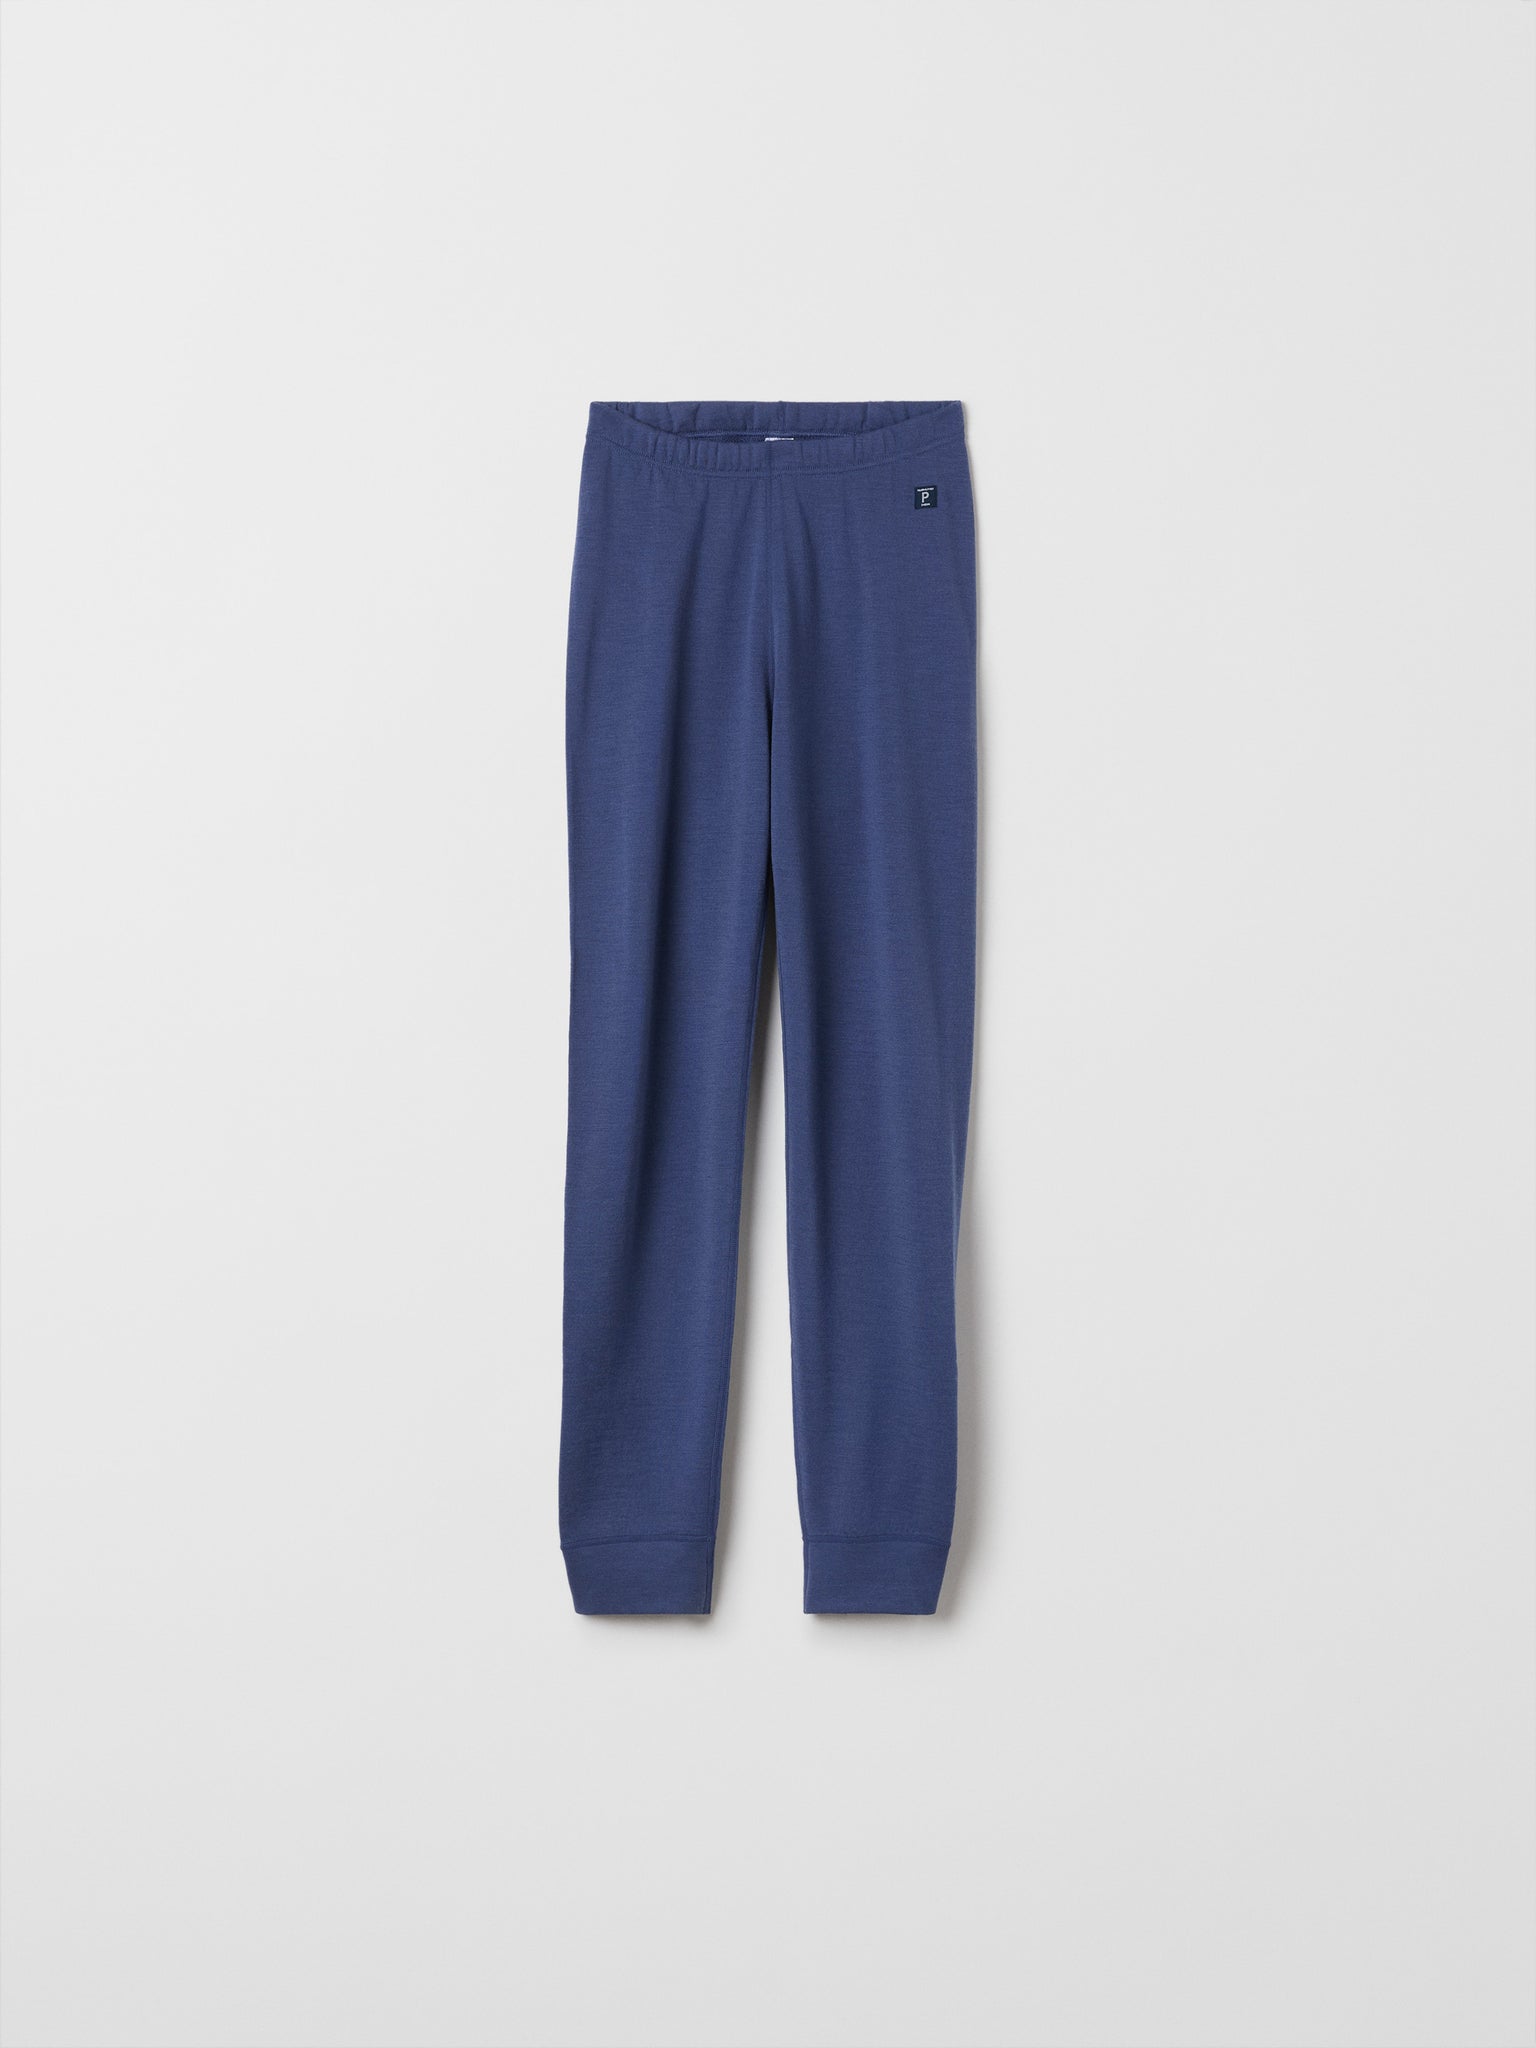 Blue Adult Terry Wool Trousers from the Polarn O. Pyret outerwear collection. Kids outerwear made from sustainably source materials